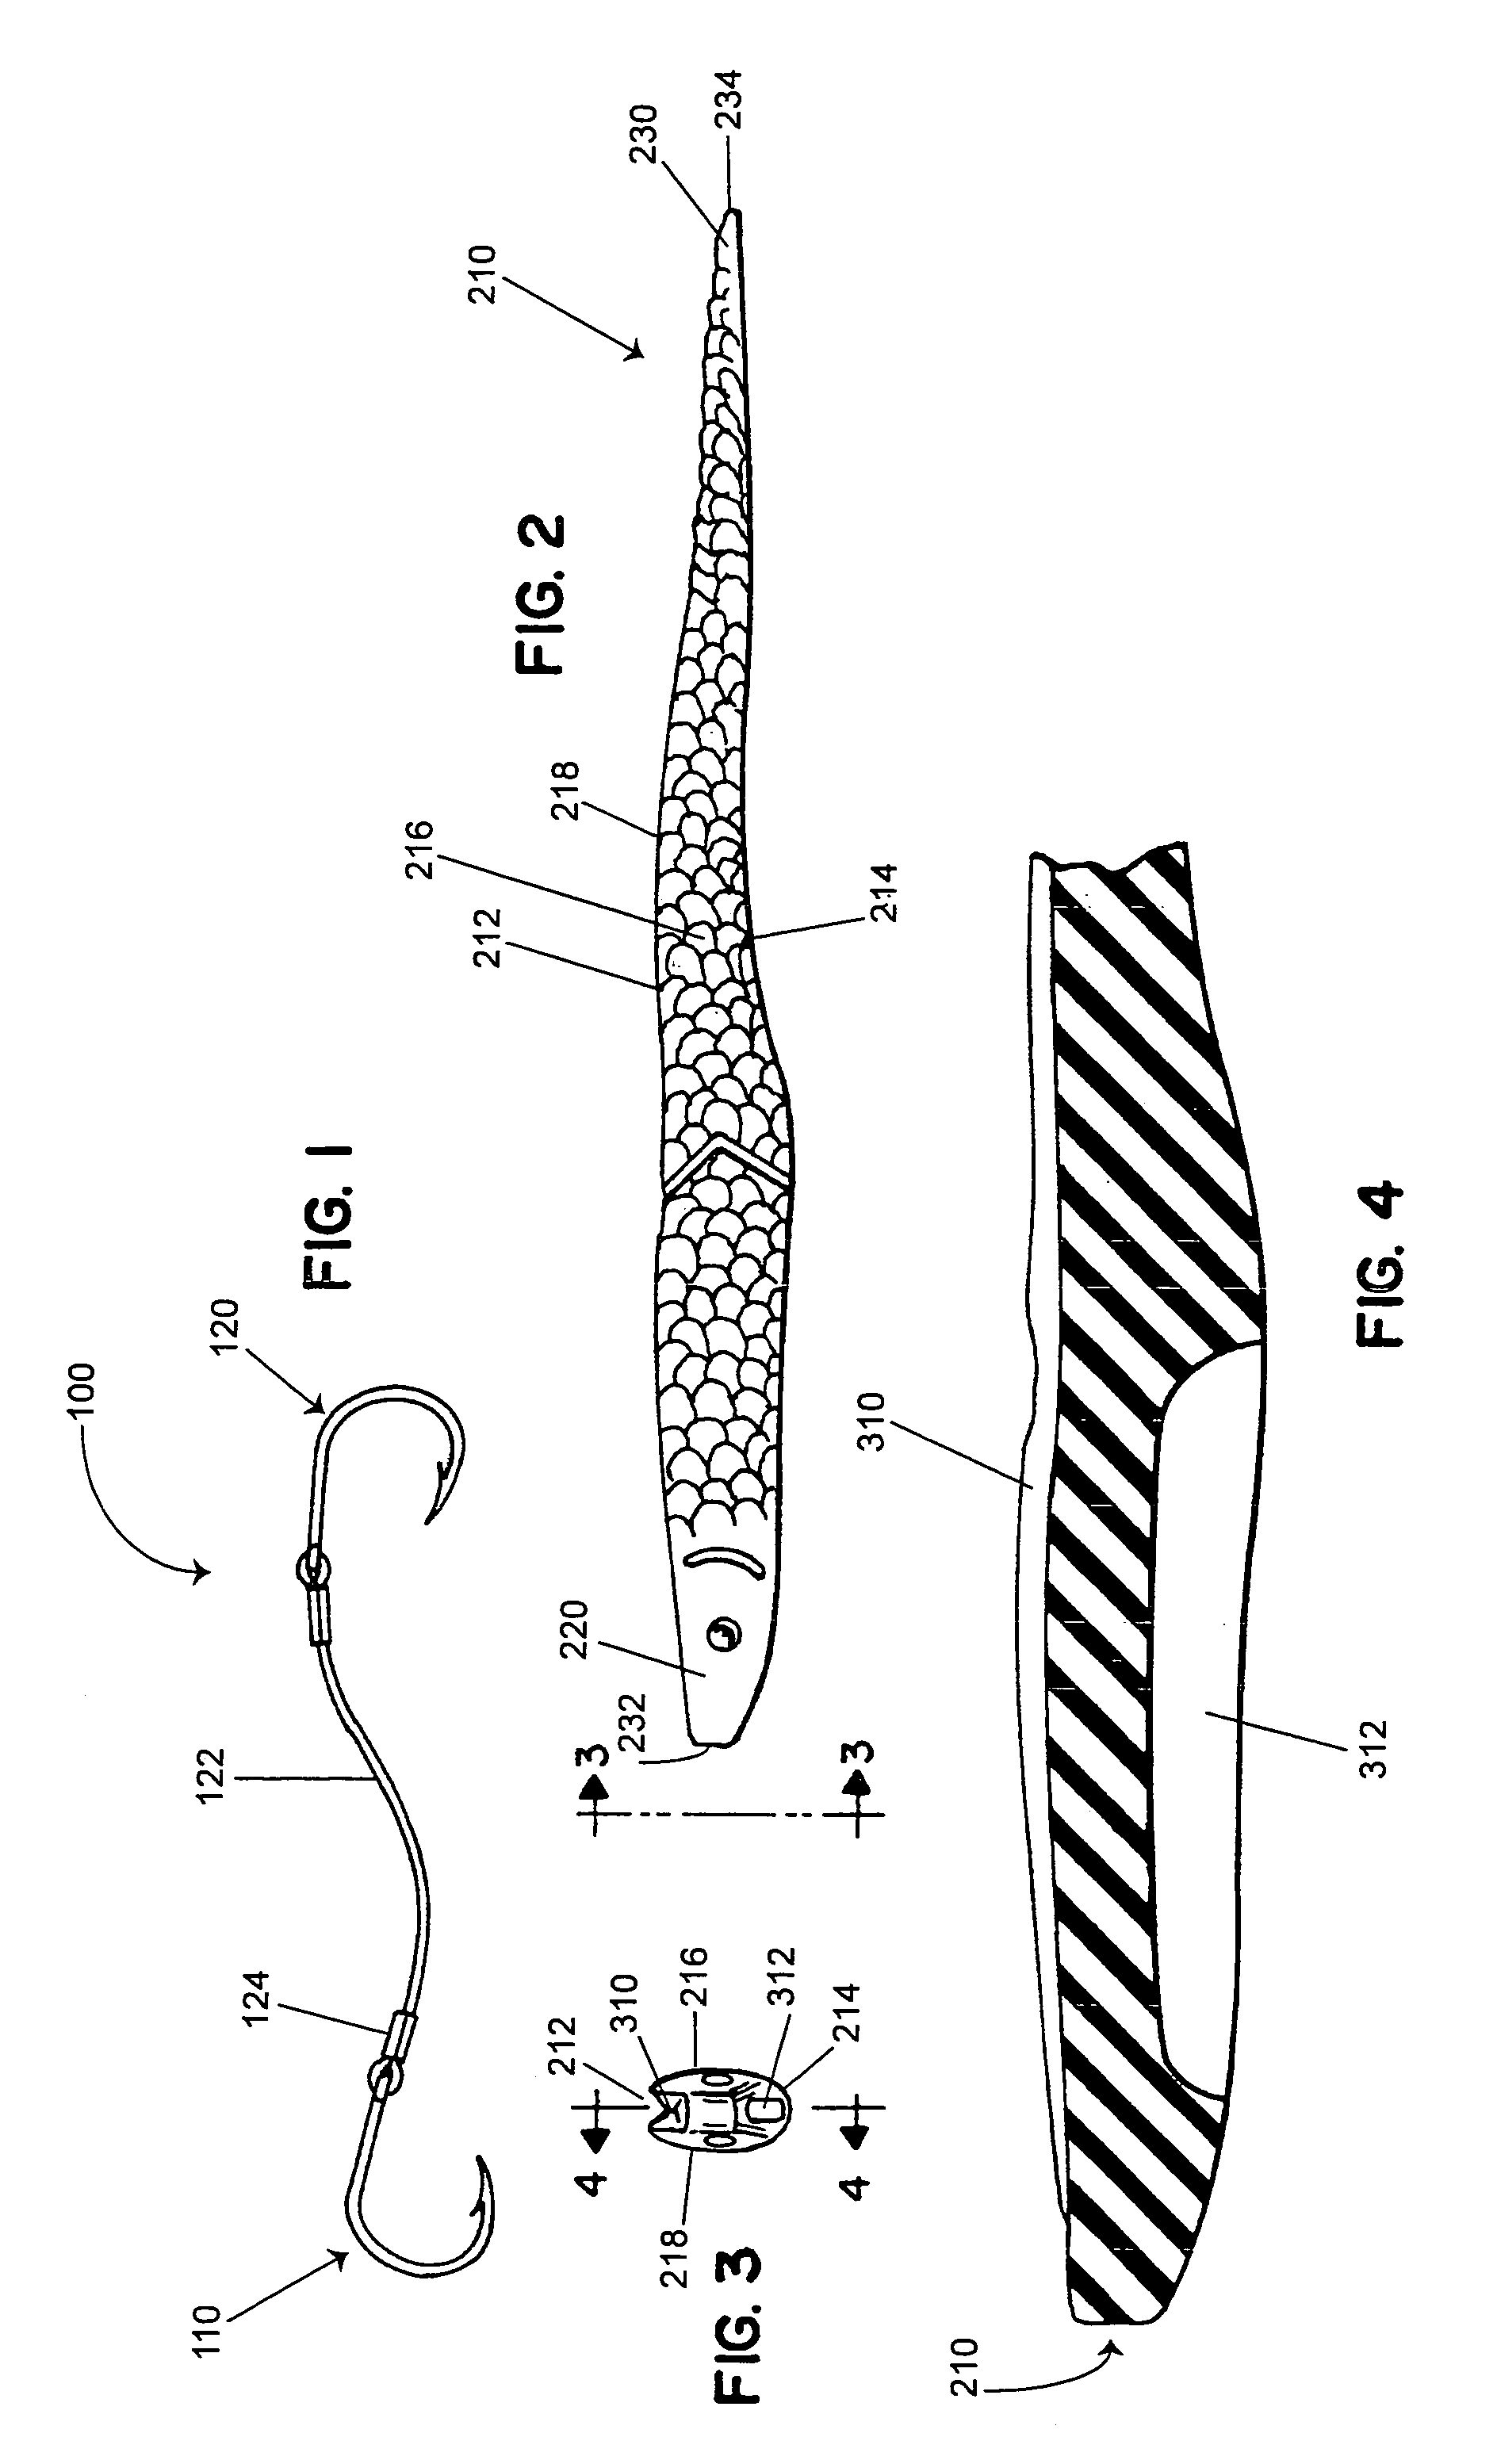 Fishing lure and hook assembly and method of rigging same